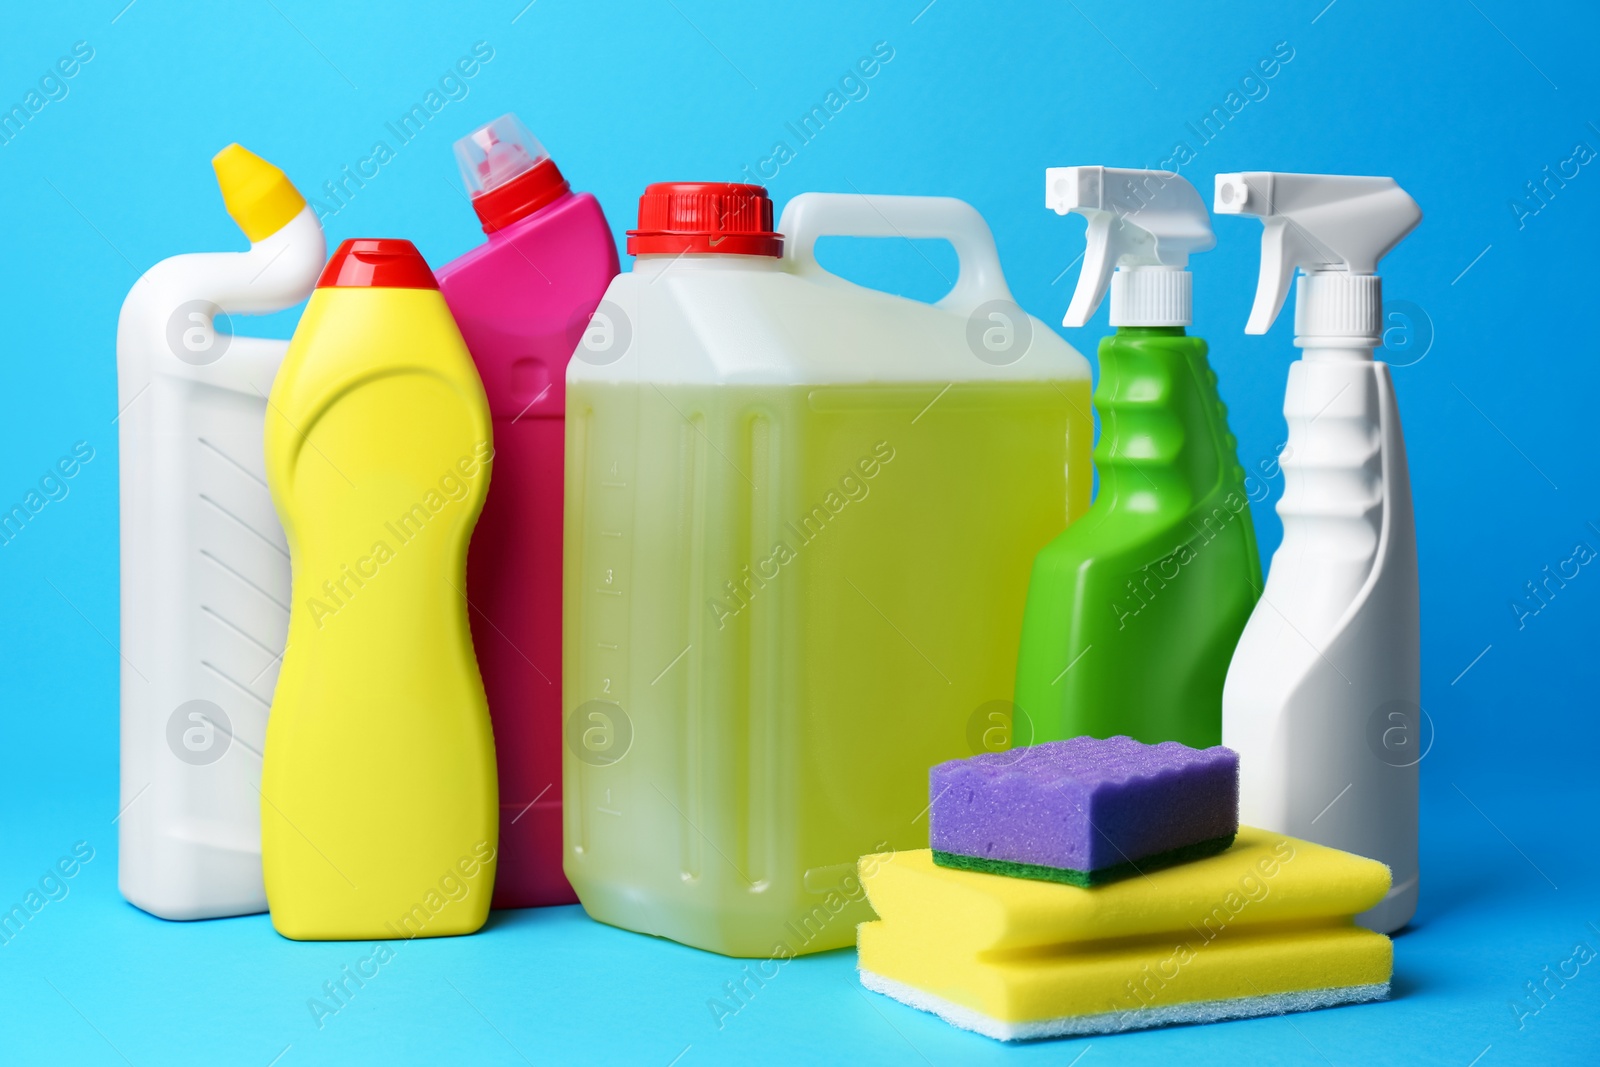 Photo of Bottles of detergents and sponges on light blue background. Cleaning supplies